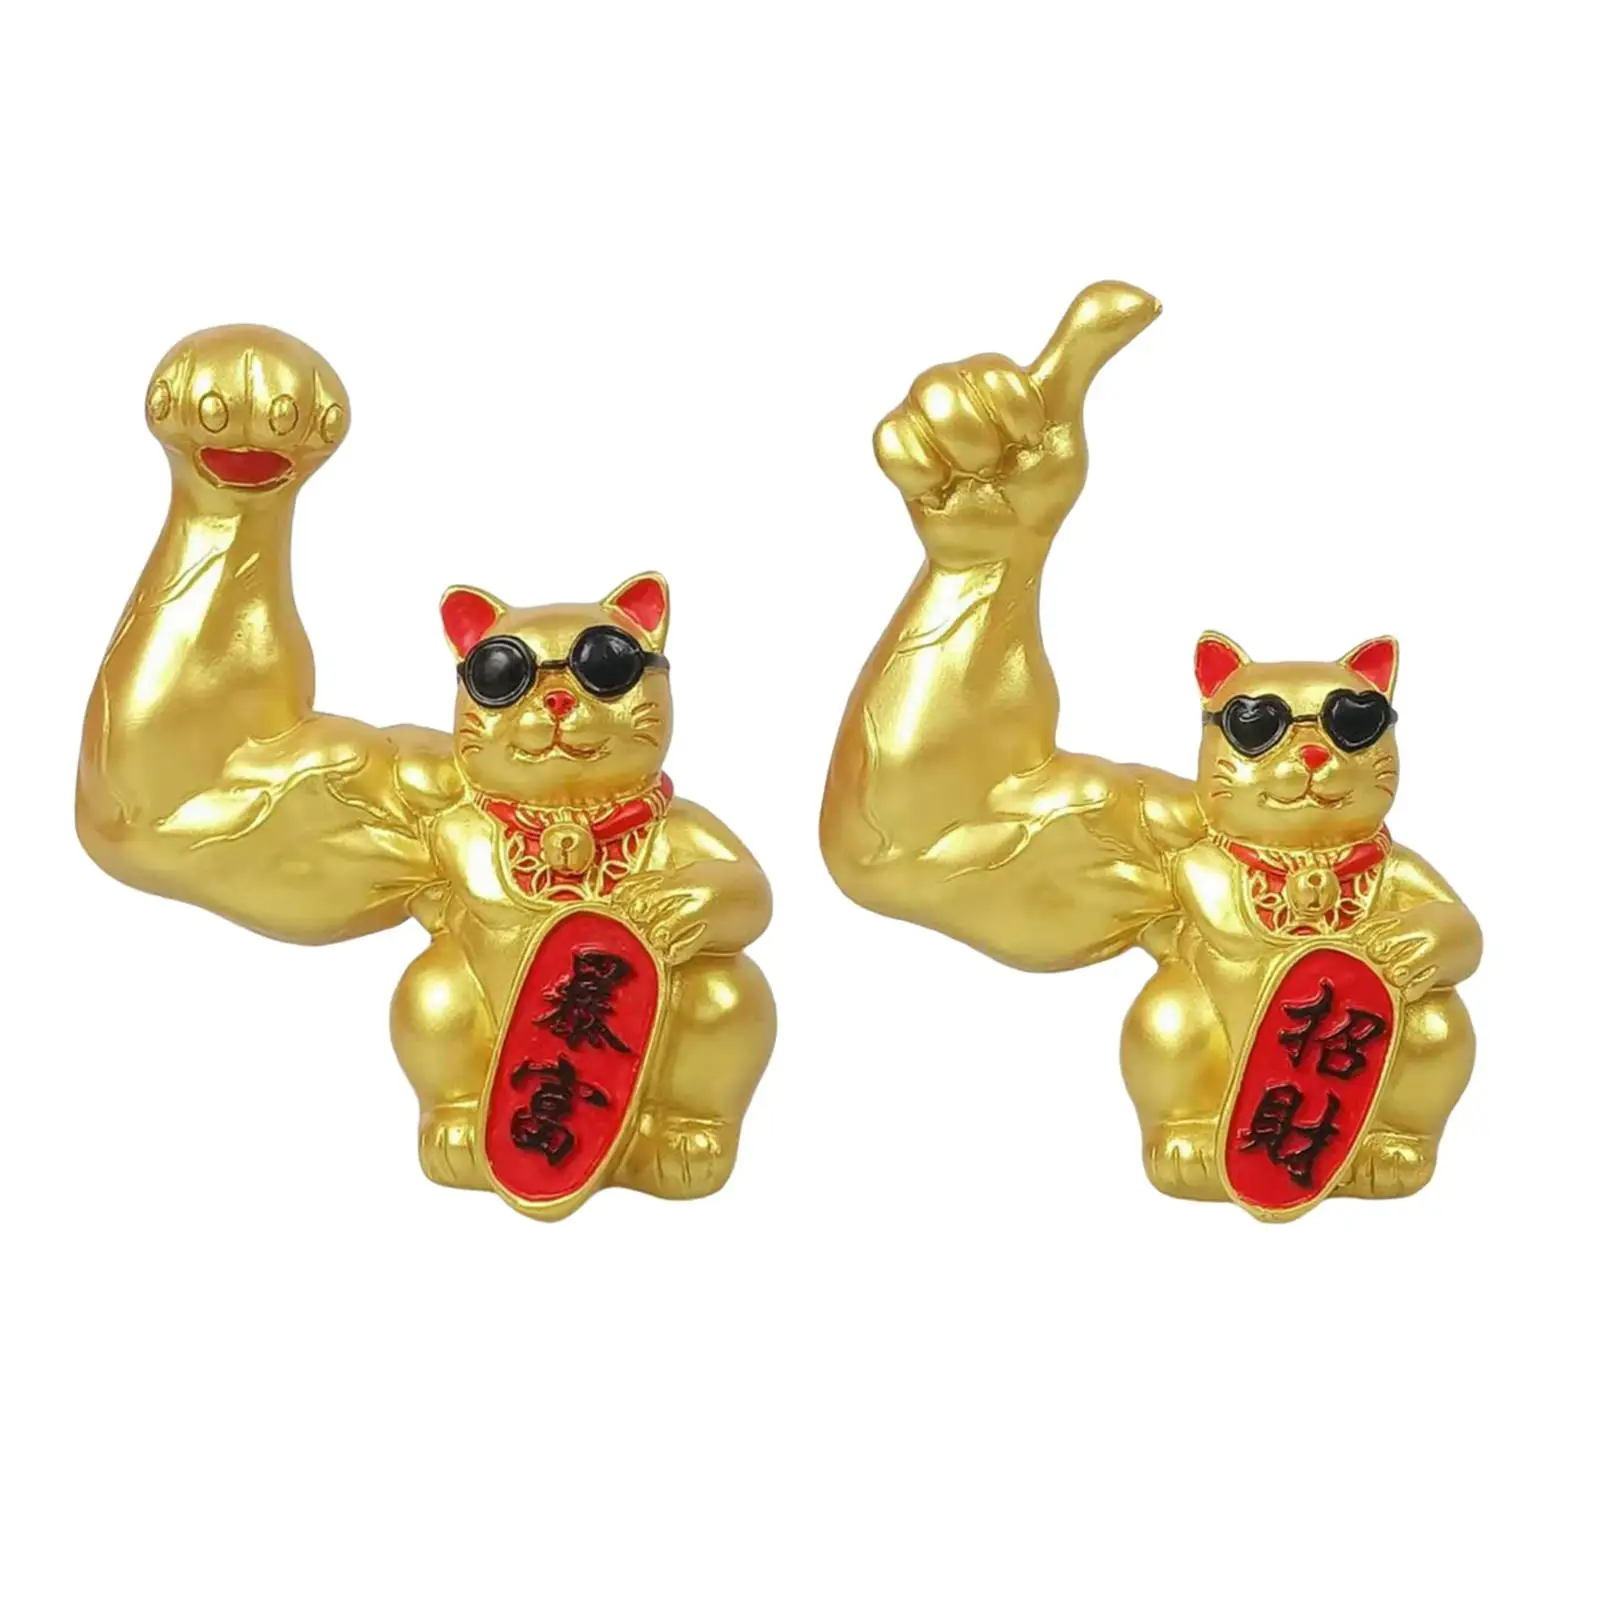 Resin Figurines Sculpture Collectible Ornament Lucky Cat Statues for Tabletop Studio